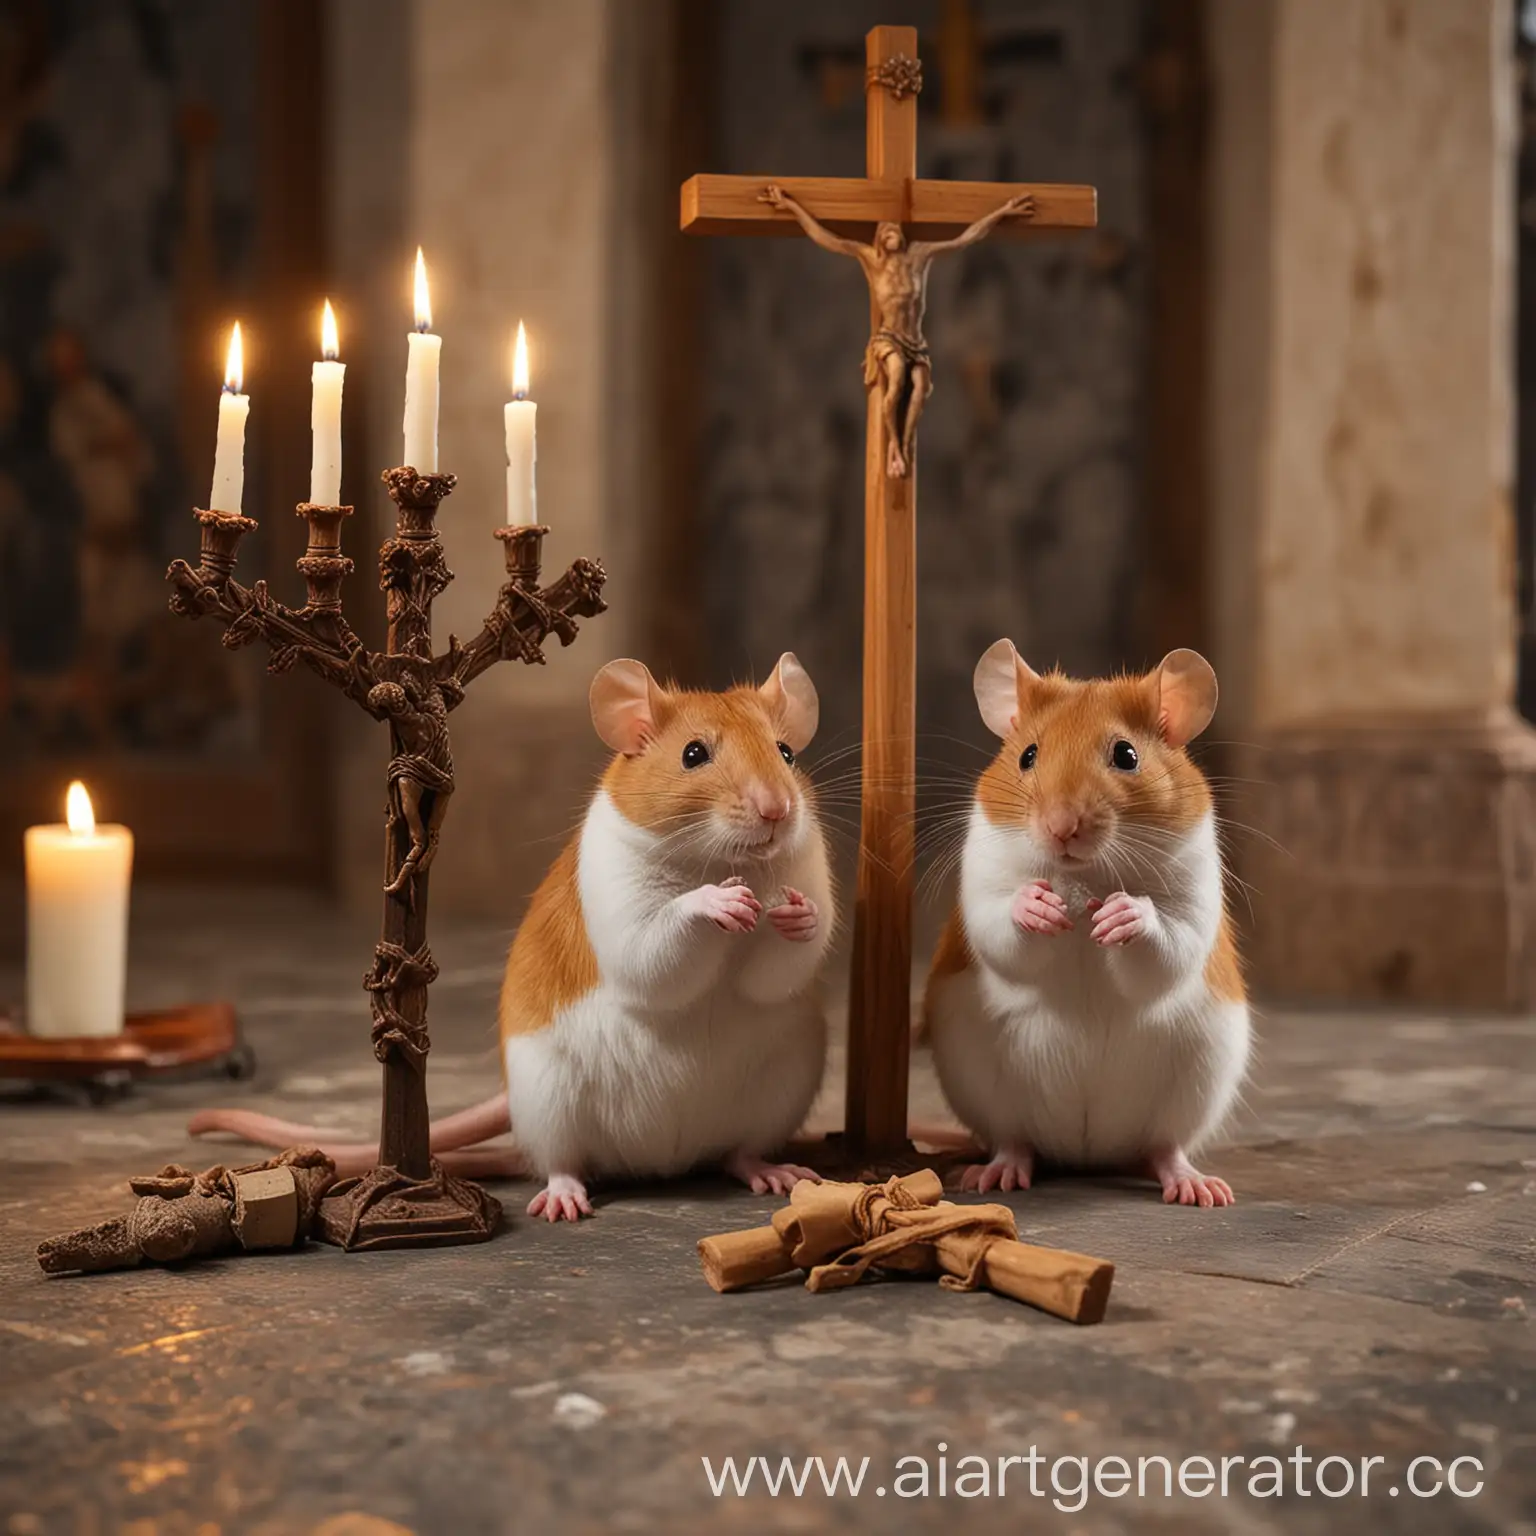 RedHaired-Rats-with-Candles-in-Orthodox-Church-Crucifixion-Scene